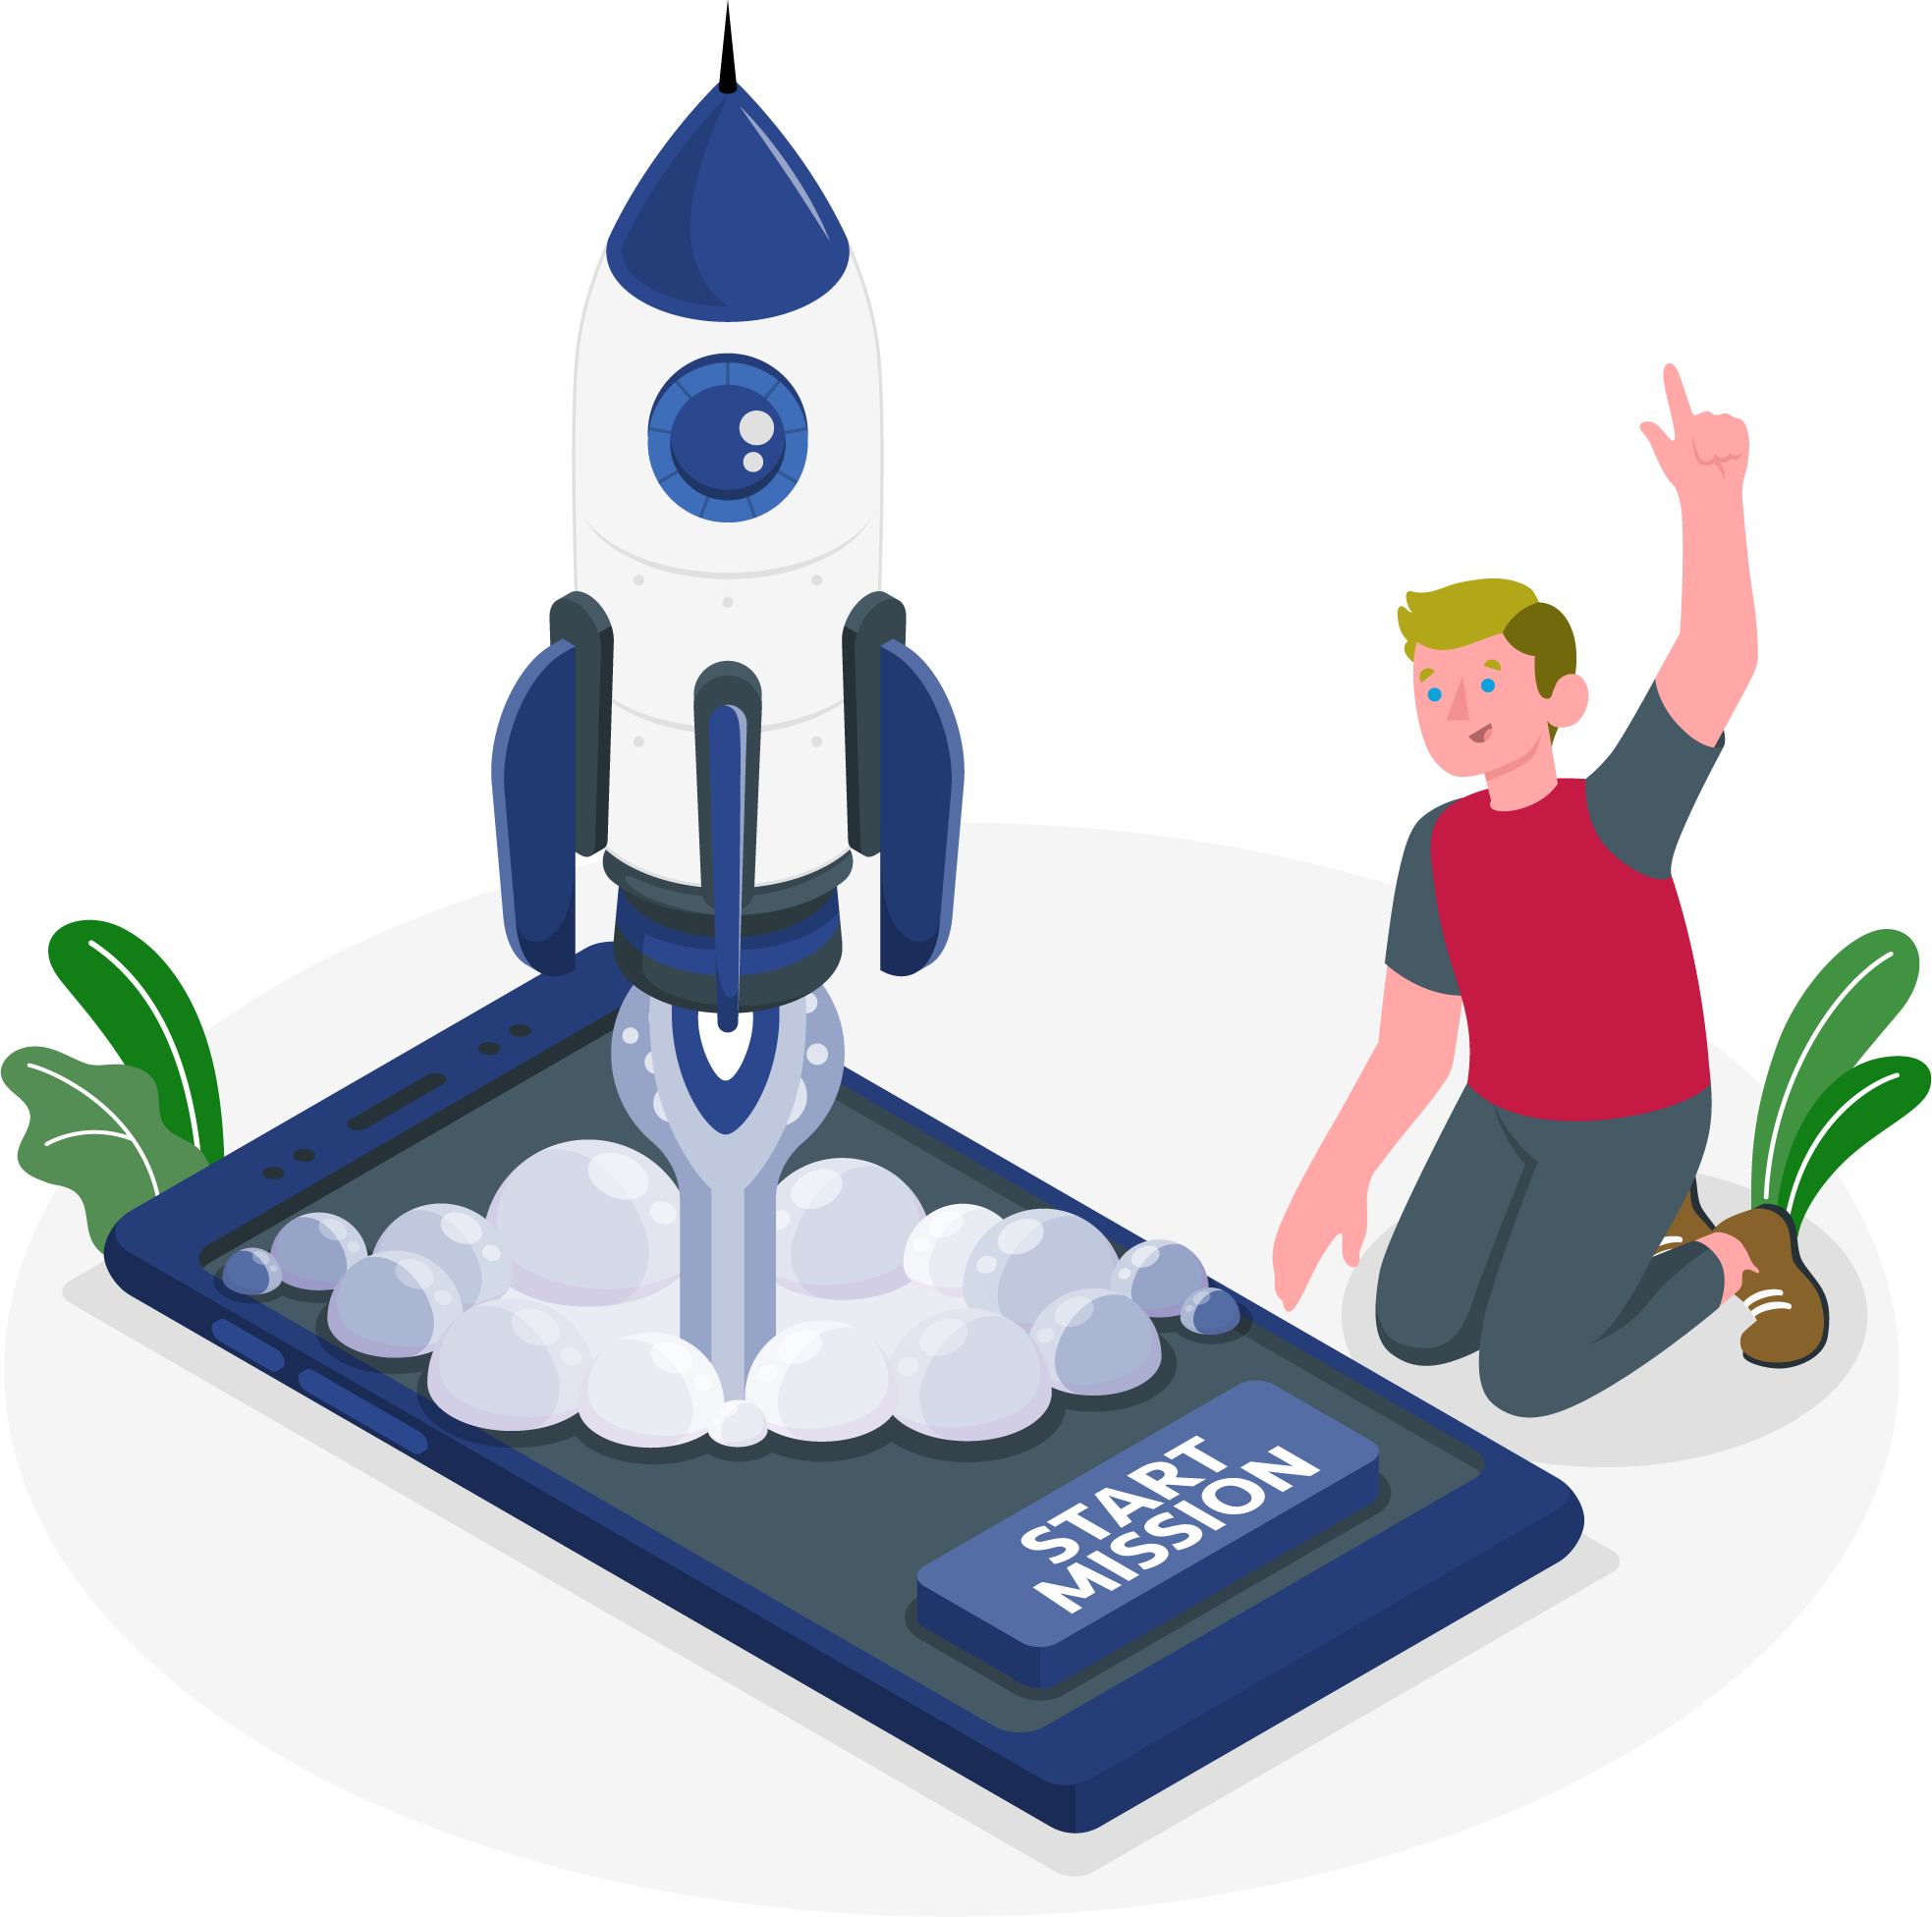 image - a person is launching a rocket from above a mobile phone, the image identifies the mission of okACCEDO - to make the web accessible to everyone